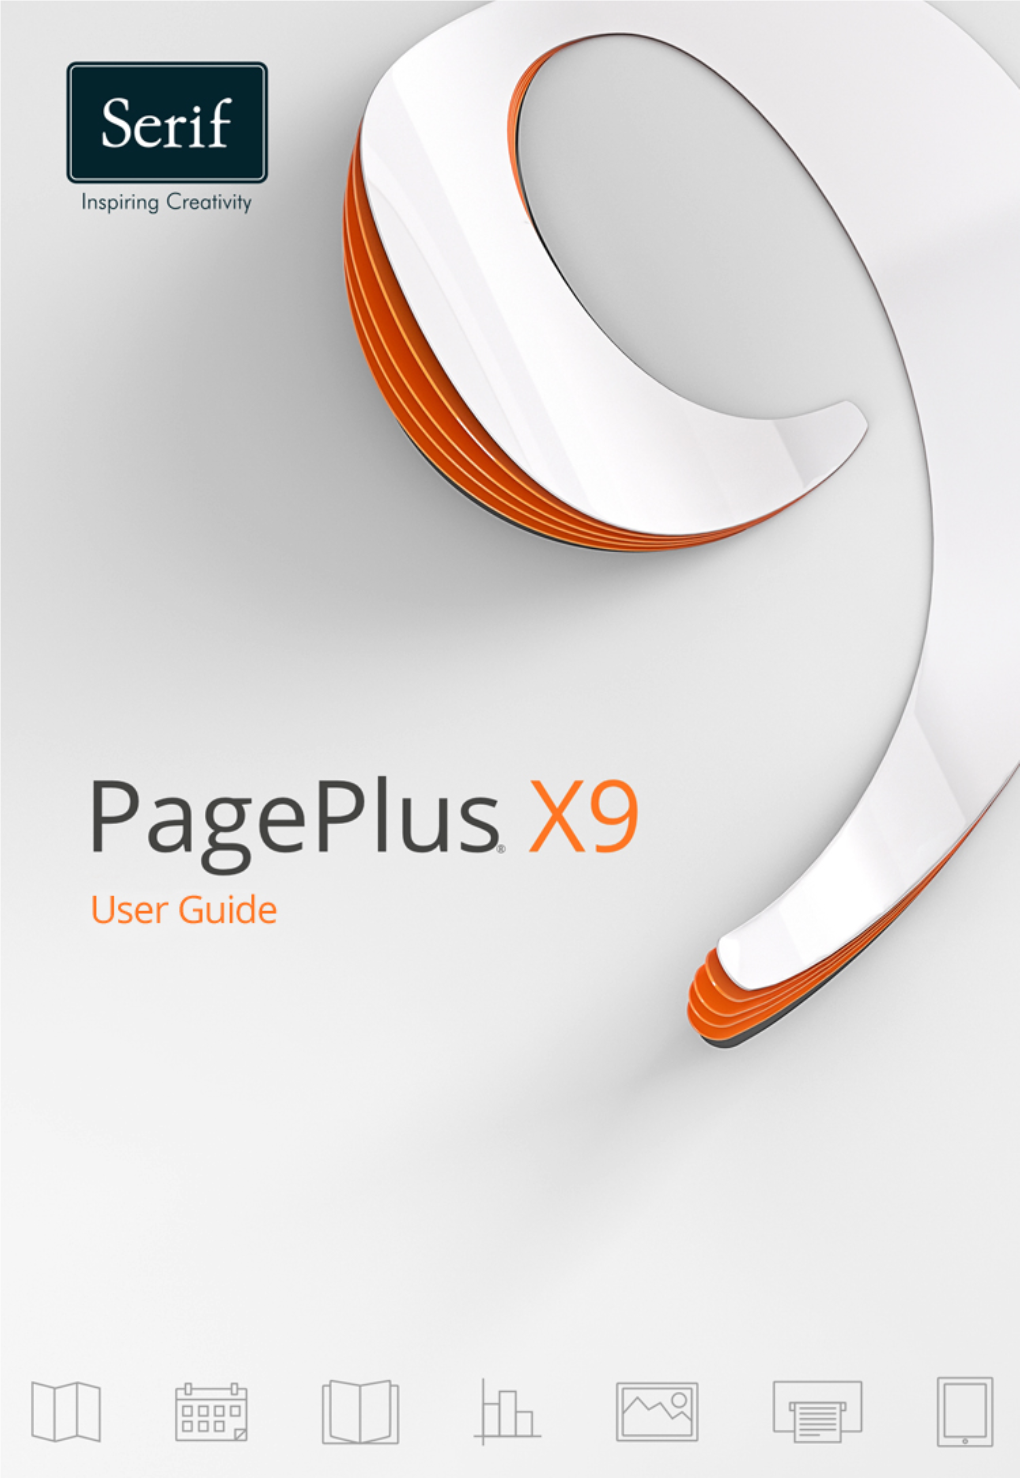 Pageplus X9 User Guide Are Also Provided